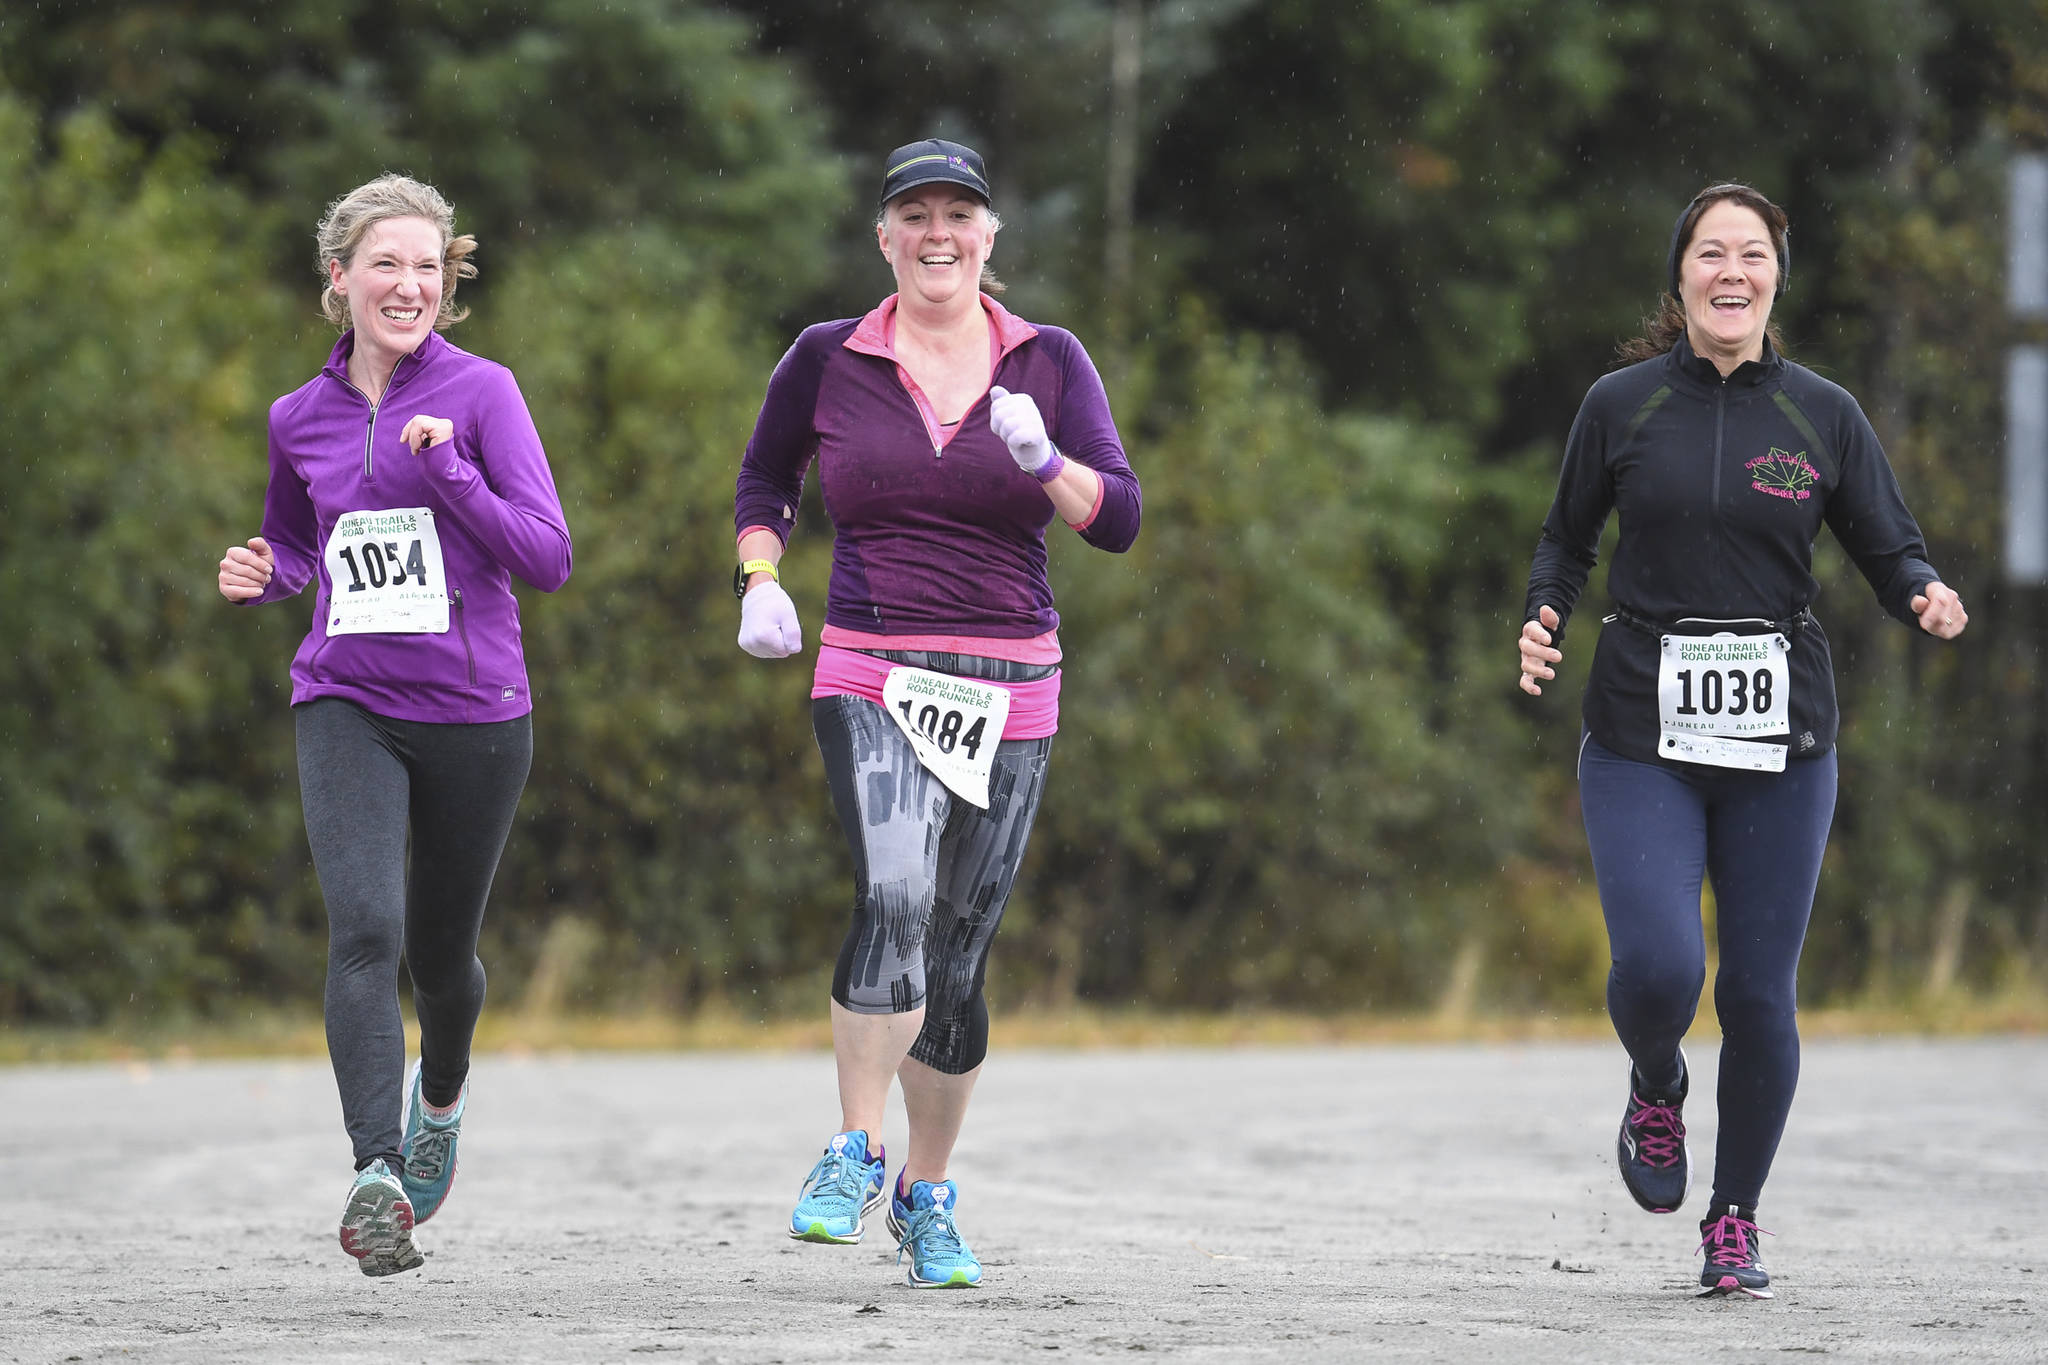 Tisha Gieser, left, Ruth Kostik, center, and Joann Rieselbach near the finish at the annual community mental health run, the Extra Tough 5K & 1 Mile Run, on Saturday, Oct. 12, 2019, at Riverbend Elementary School. The run is sponsored by National Alliance on Mental Illness (NAMI) Juneau. (Michael Penn | Juneau Empire)